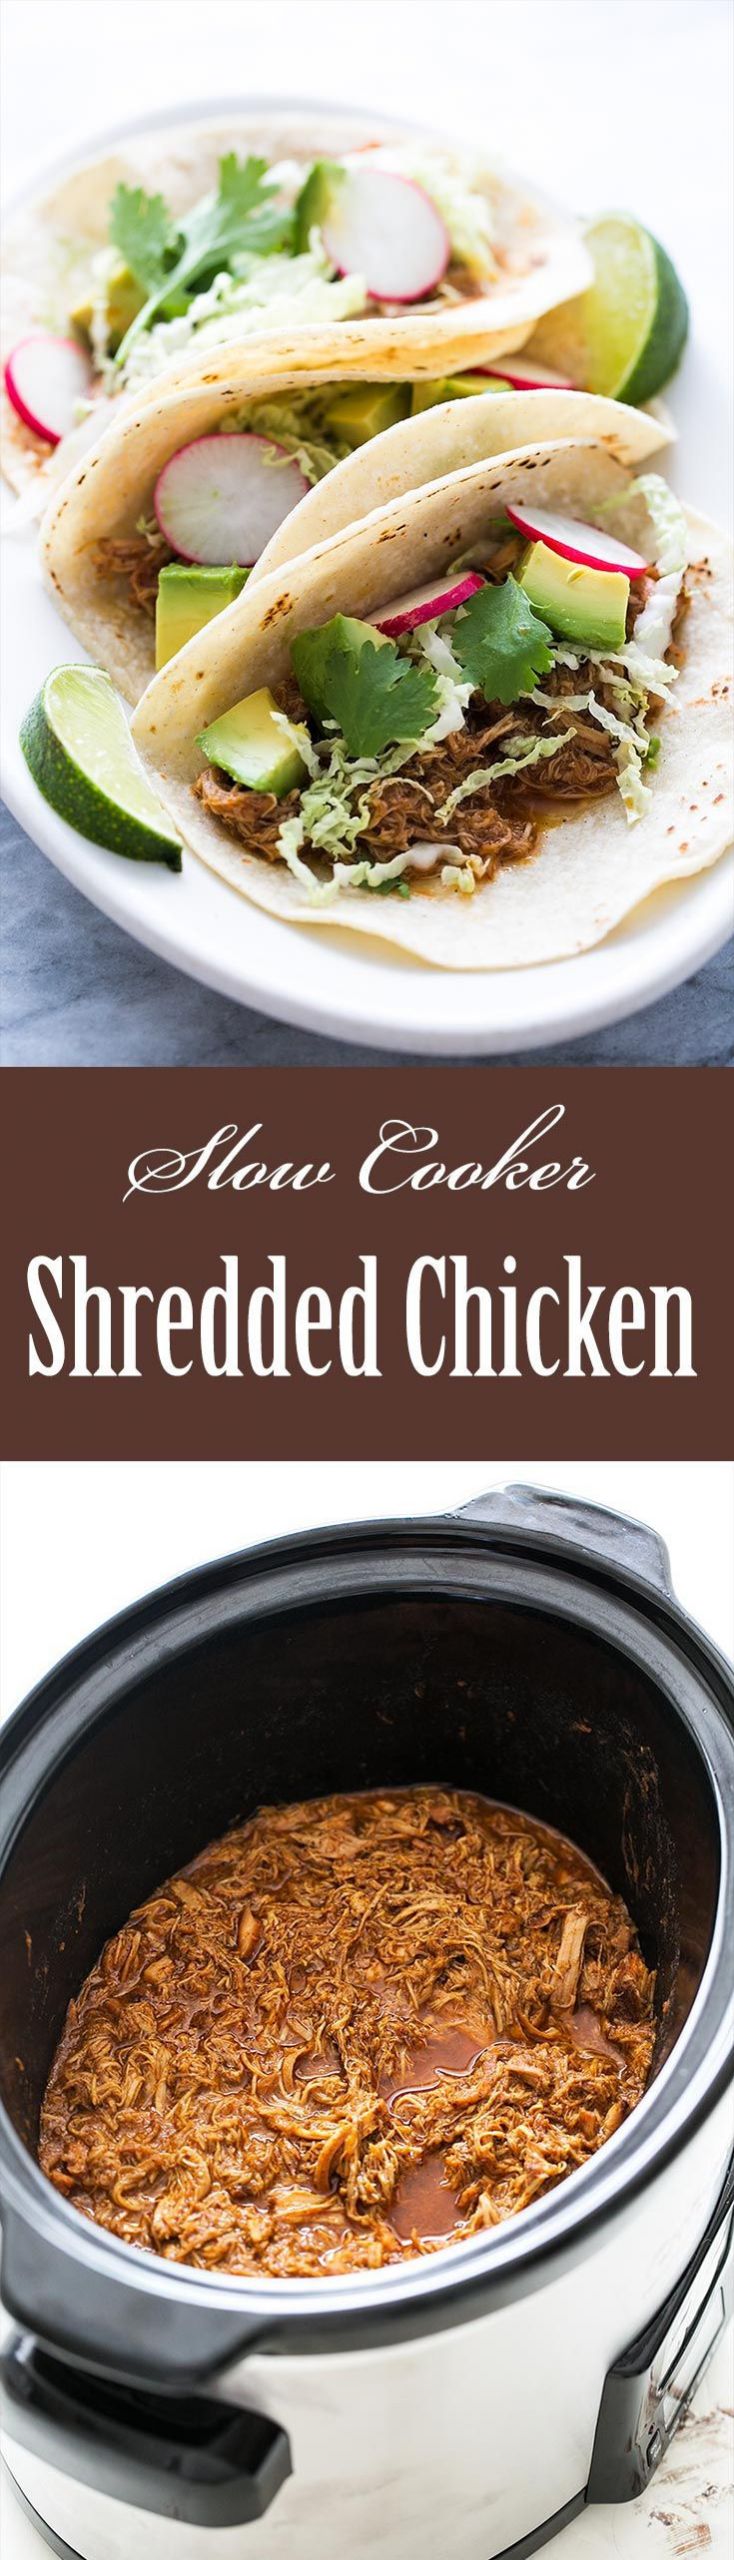 Shredded Chicken Thighs Slow Cooker
 Slow Cooker Chicken Tacos Recipe